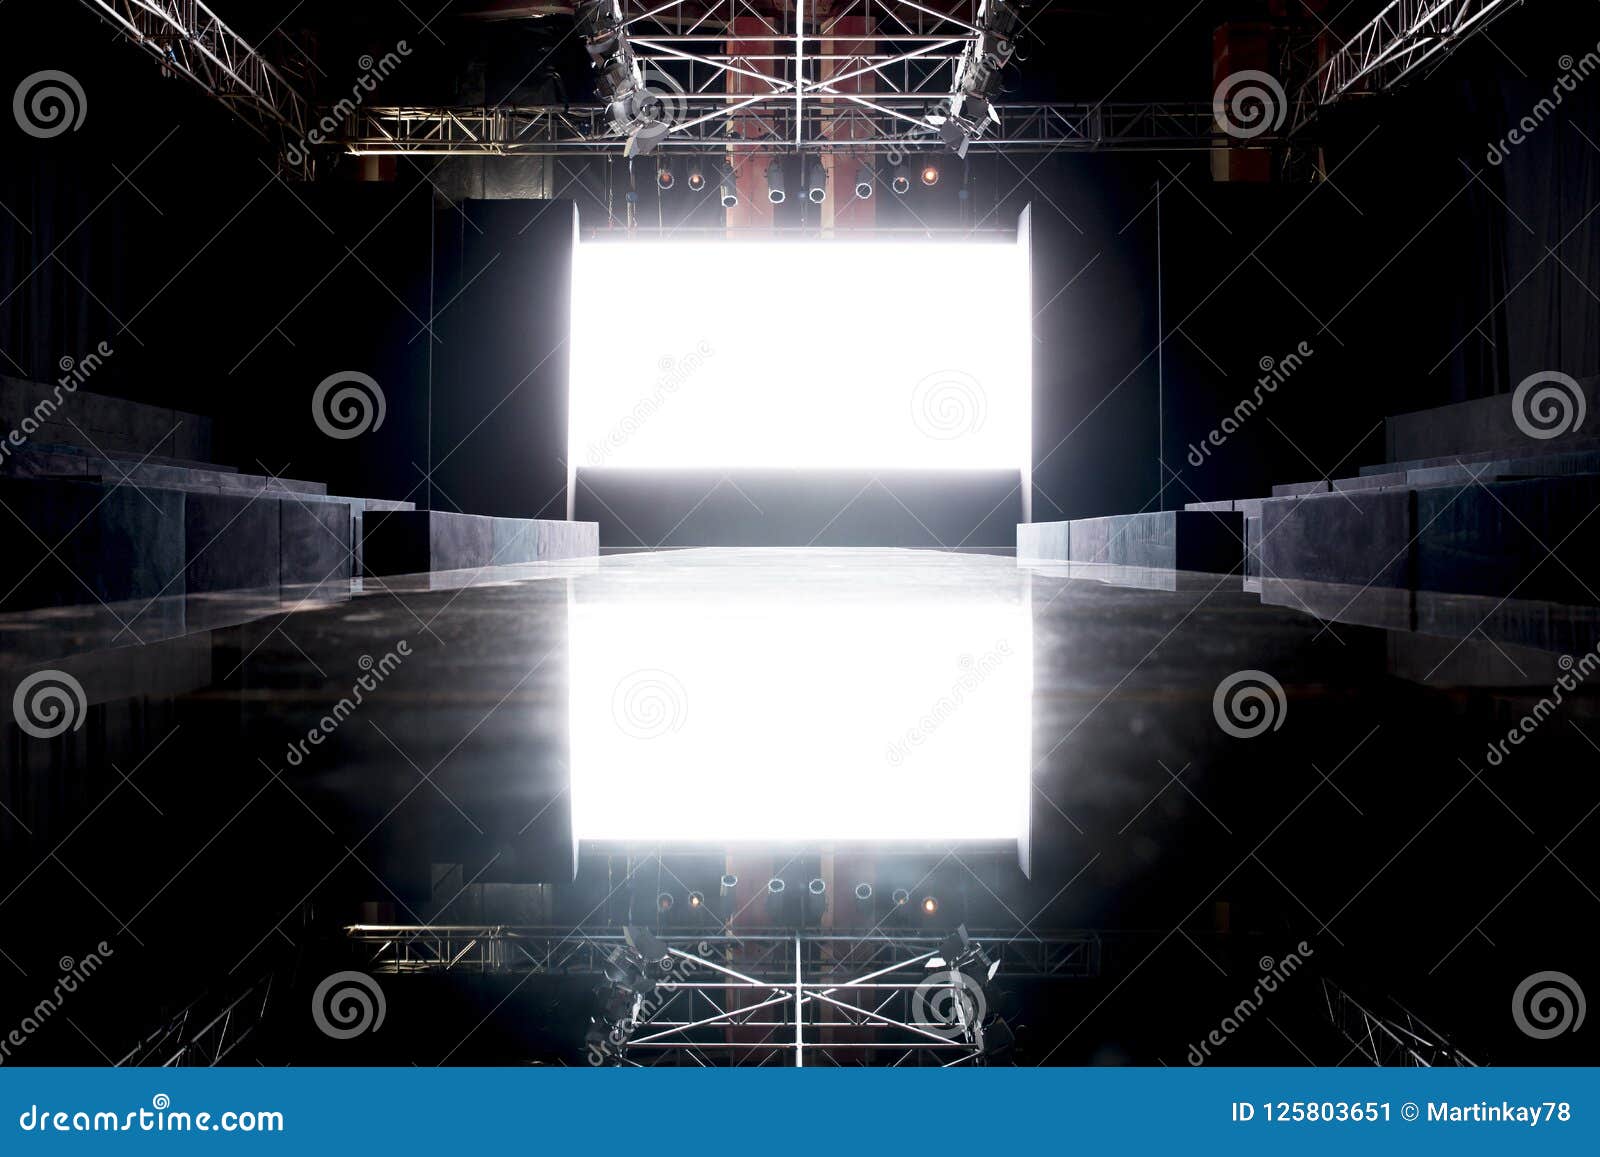 Fashion Show, Catwalk Runway Show Empty Stage. Stock Image - london, event: 125803651